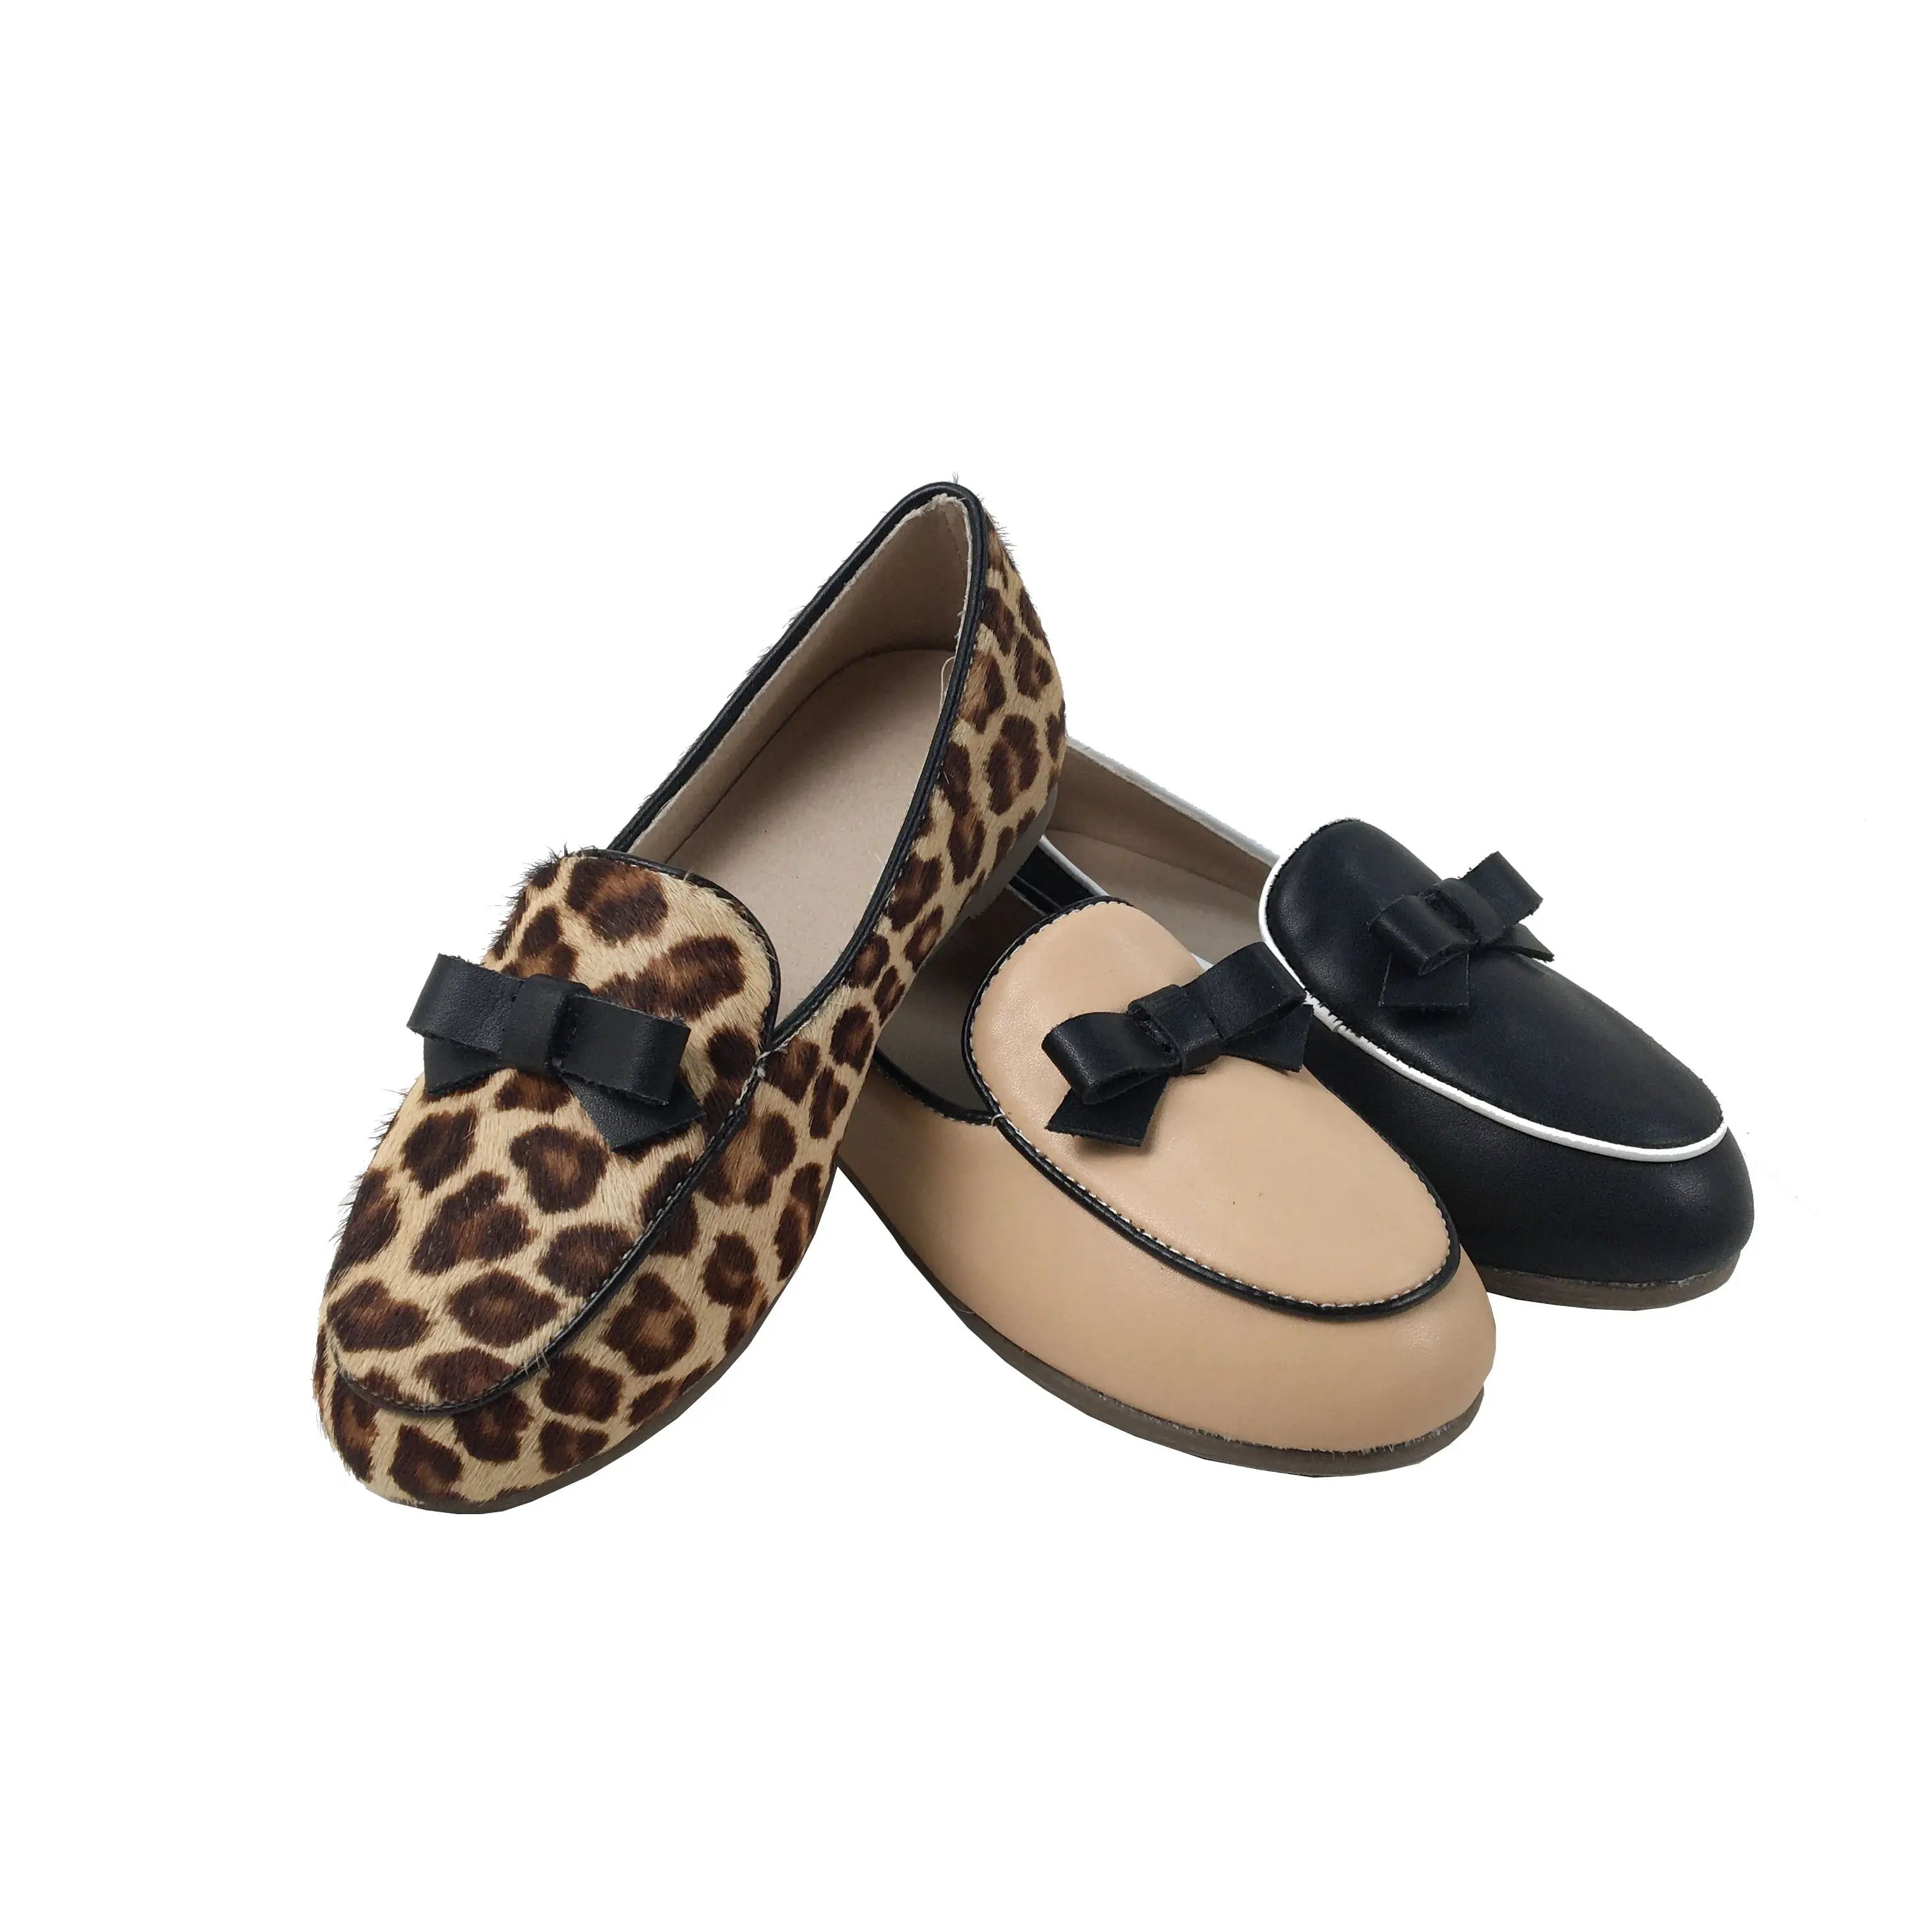 New Design High-end Leather Children Casual Shoes Flats Loafers Leather Bow Girls Shoes Leopard Horse Hair Dress Shoes